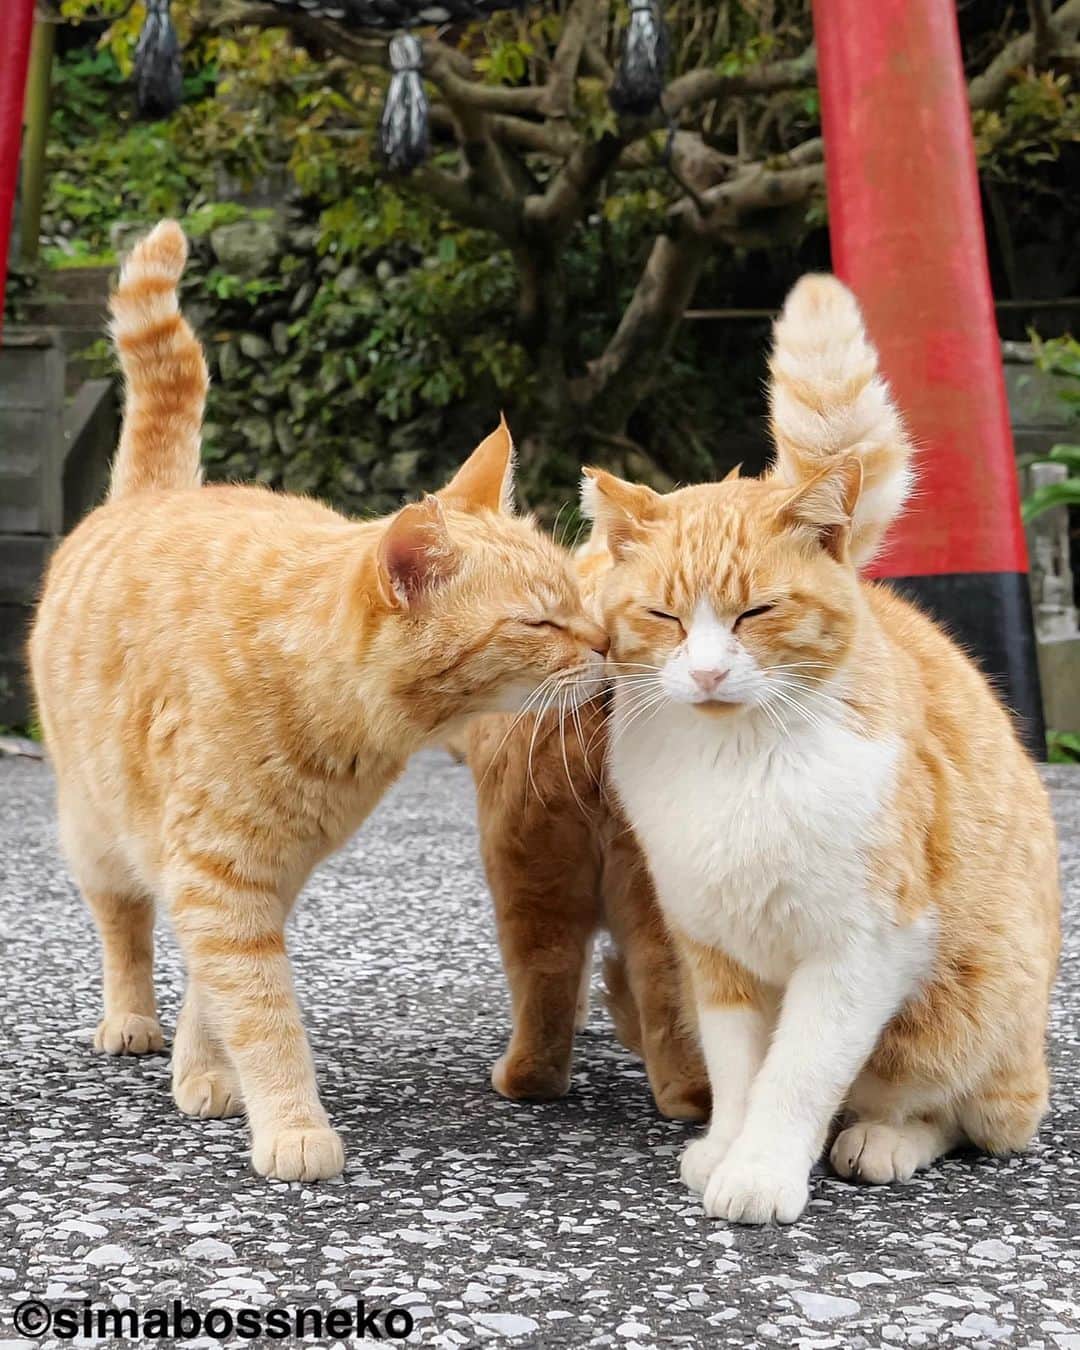 simabossnekoさんのインスタグラム写真 - (simabossnekoInstagram)「・ なかよしkiss😽😸💓 Morning kiss✨  5枚目の投稿は動画です。 The 5th post is video. Swipeしてね←←←🐾  ・ 〜お知らせ〜 只今、人気の写真を厳選したクリアファイルを5種類、simabossneko's shopにて販売中です。  お得なセットも❣️ さち3枚セットに、さち3枚＋島猫2枚の5枚セットも販売中✨  ◎販売はminneと、メルカリShops内「simabossneko's shop」にて  各ショップへは、@simabossneko または @p_nyanco22 のプロフィールリンクからご覧いただけます。  🔍メルカリは、アプリ立ち上げ後「simabossneko's shop」で検索してみてください。  👉ストーリーハイライトにも、ショップへのリンク(minne)があります。そちらも是非ご覧ください。  ※8/29現在、ご購入いただきました作品の発送は、9/1以降を予定しております。何卒ご了承くださいませ。 ・ ・ 〜Notice〜 Island cats A4 file folders are available!✨  The file folders are carefully selected from 5 popular photos.  We also sell a great set ❣️ Sachi 3-piece set, 5-piece set of 3 Sachi + 2 island cats are also available✨  The  A4 size file folders are sold at minne "simabossneko's shop“  ●Shop URL https://minne.com/＠simabossneko  🇺🇸🇰🇷🇹🇼 It is possible to purchase and ship from Taiwan, Hong Kong, the USA, Korea, etc.  🇫🇷🇬🇧🇩🇪 It is now possible to ship and purchase the works to Europe!! France, UK, Germany etc.  ※ Shipping fee will be charged separately.  You can reach the shop from the profile link of @simabossneko or @p_nyanco22   And, Story highlights also have a link to the shop. Please take a look there too. ・ ・ #クリアファイル #しまねこ #島猫 #ねこ #にゃんすたぐらむ #猫写真 #cats_of_world #catloversclub #pleasantcats #catstagram #meowed #ig_japan #lumixg9」8月29日 7時32分 - simabossneko